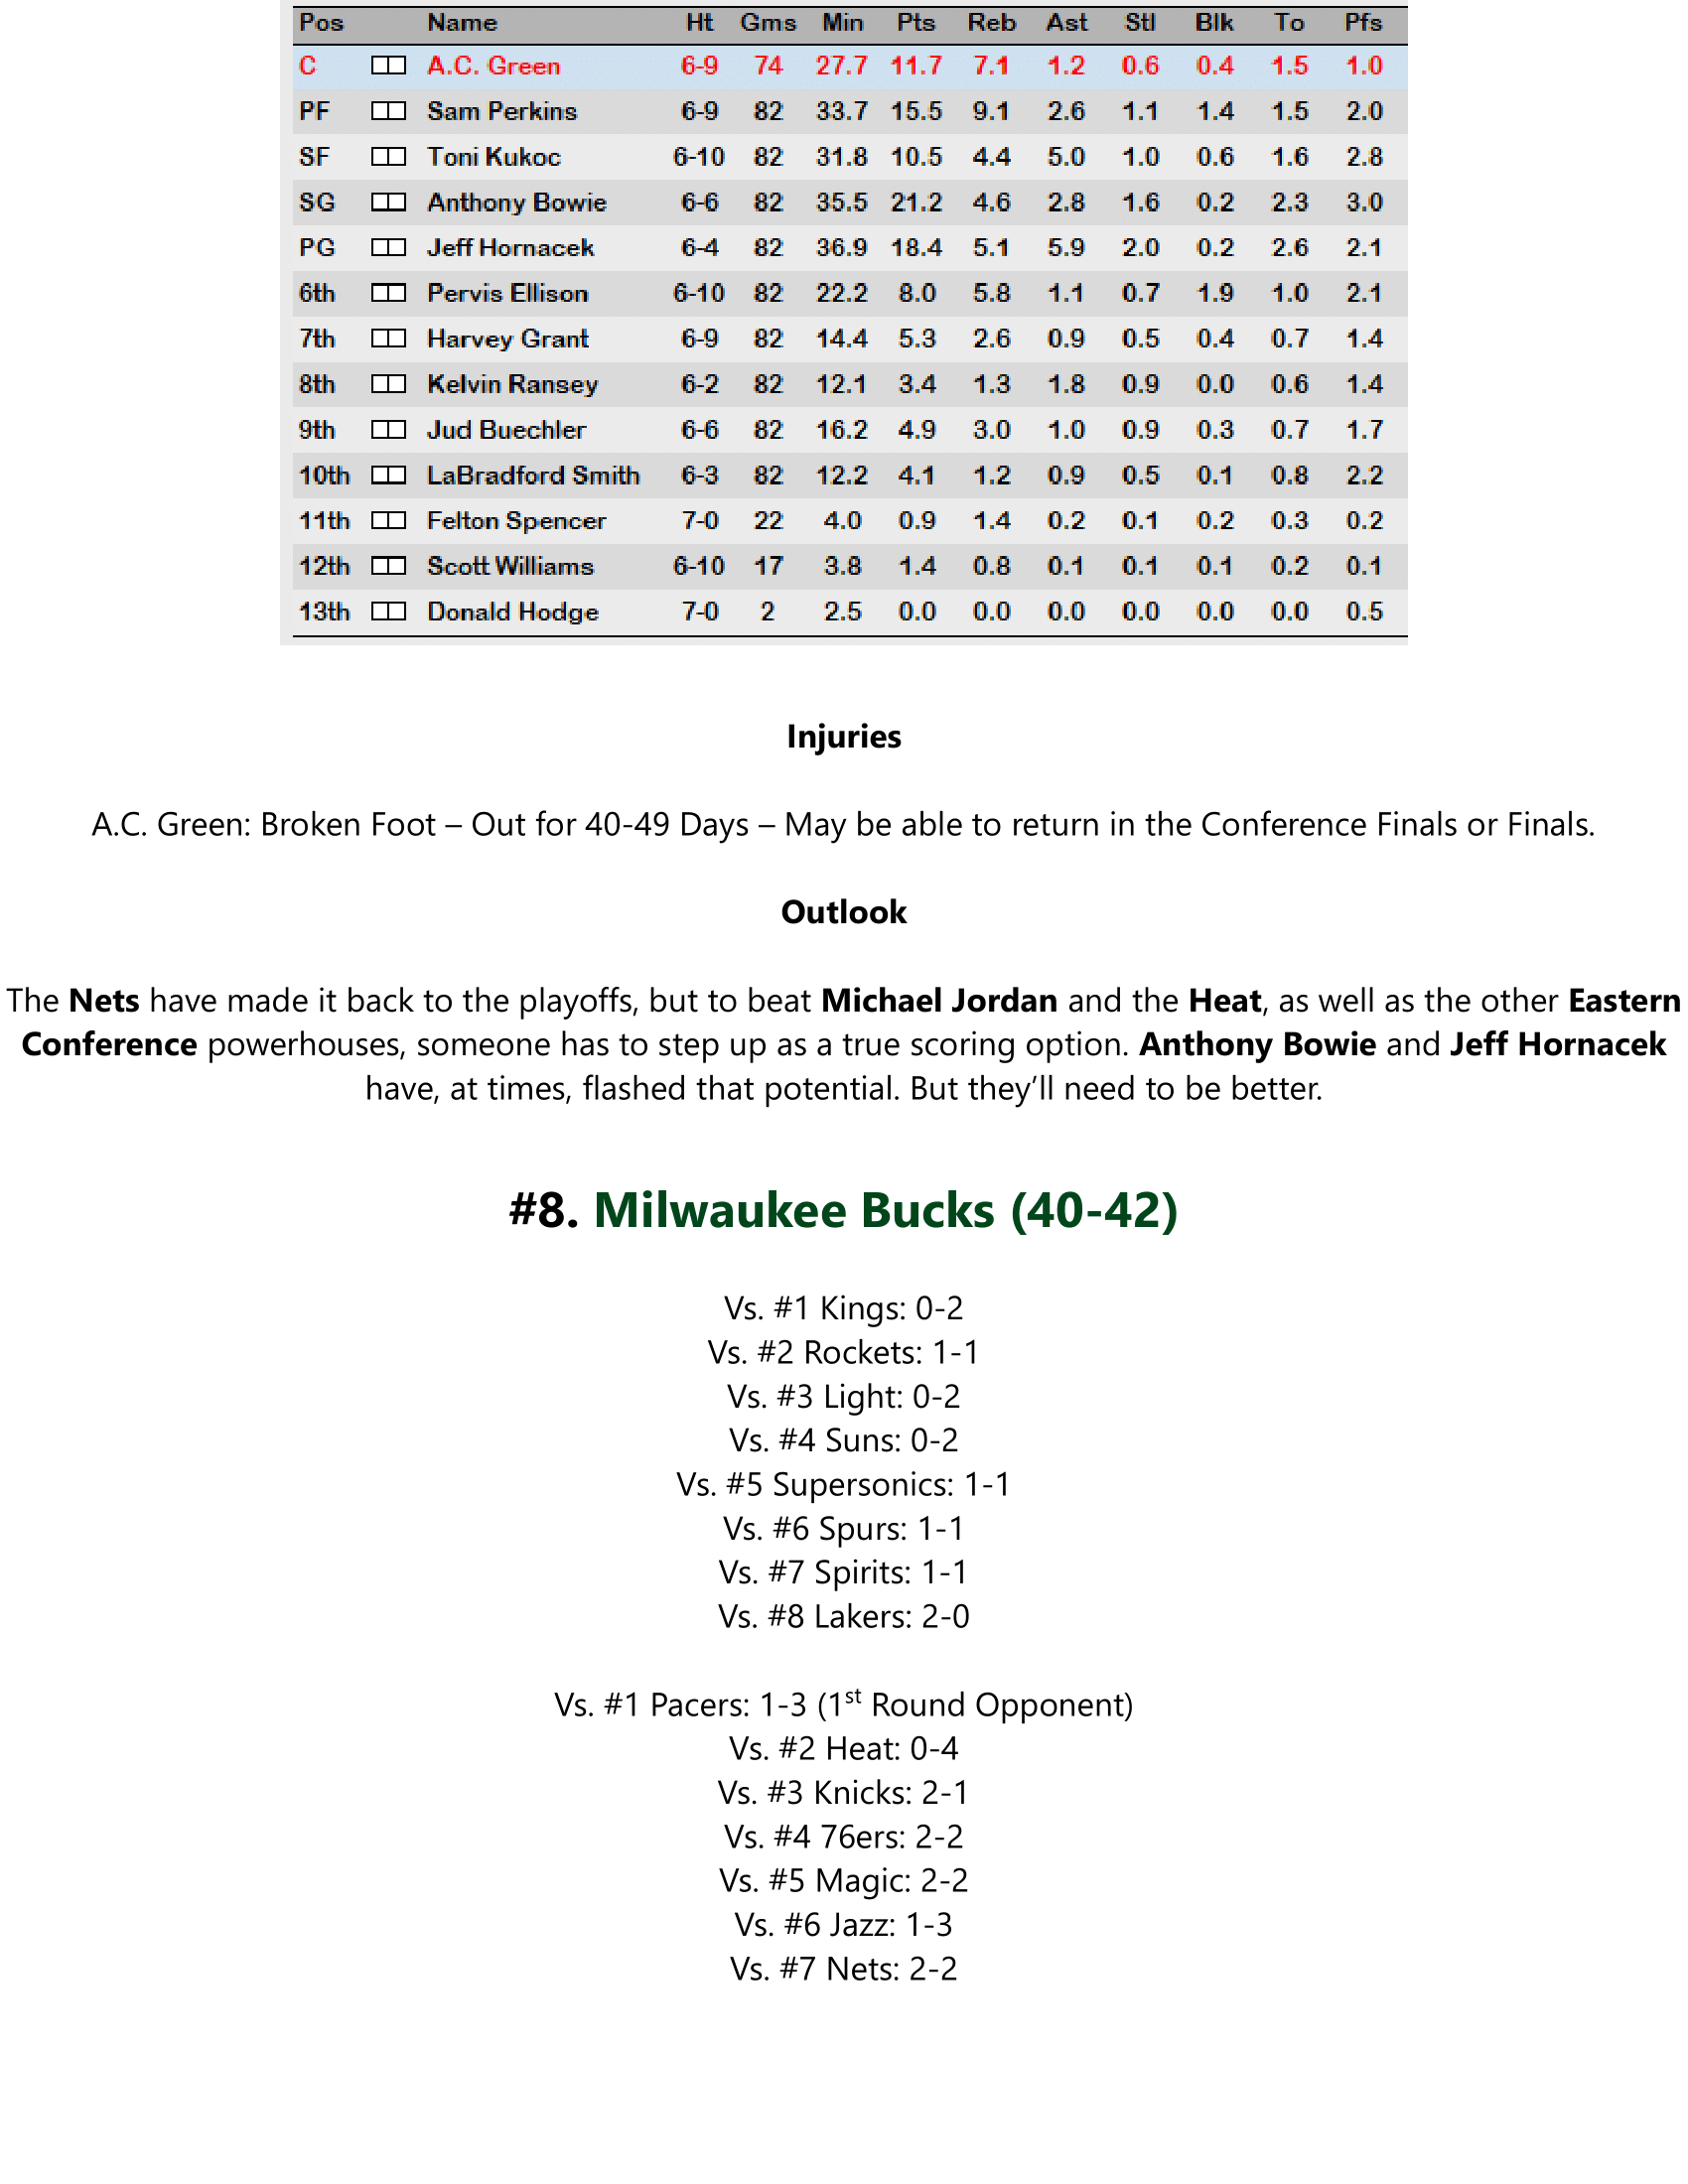 91-92-Part-4-Playoff-Preview-24.png